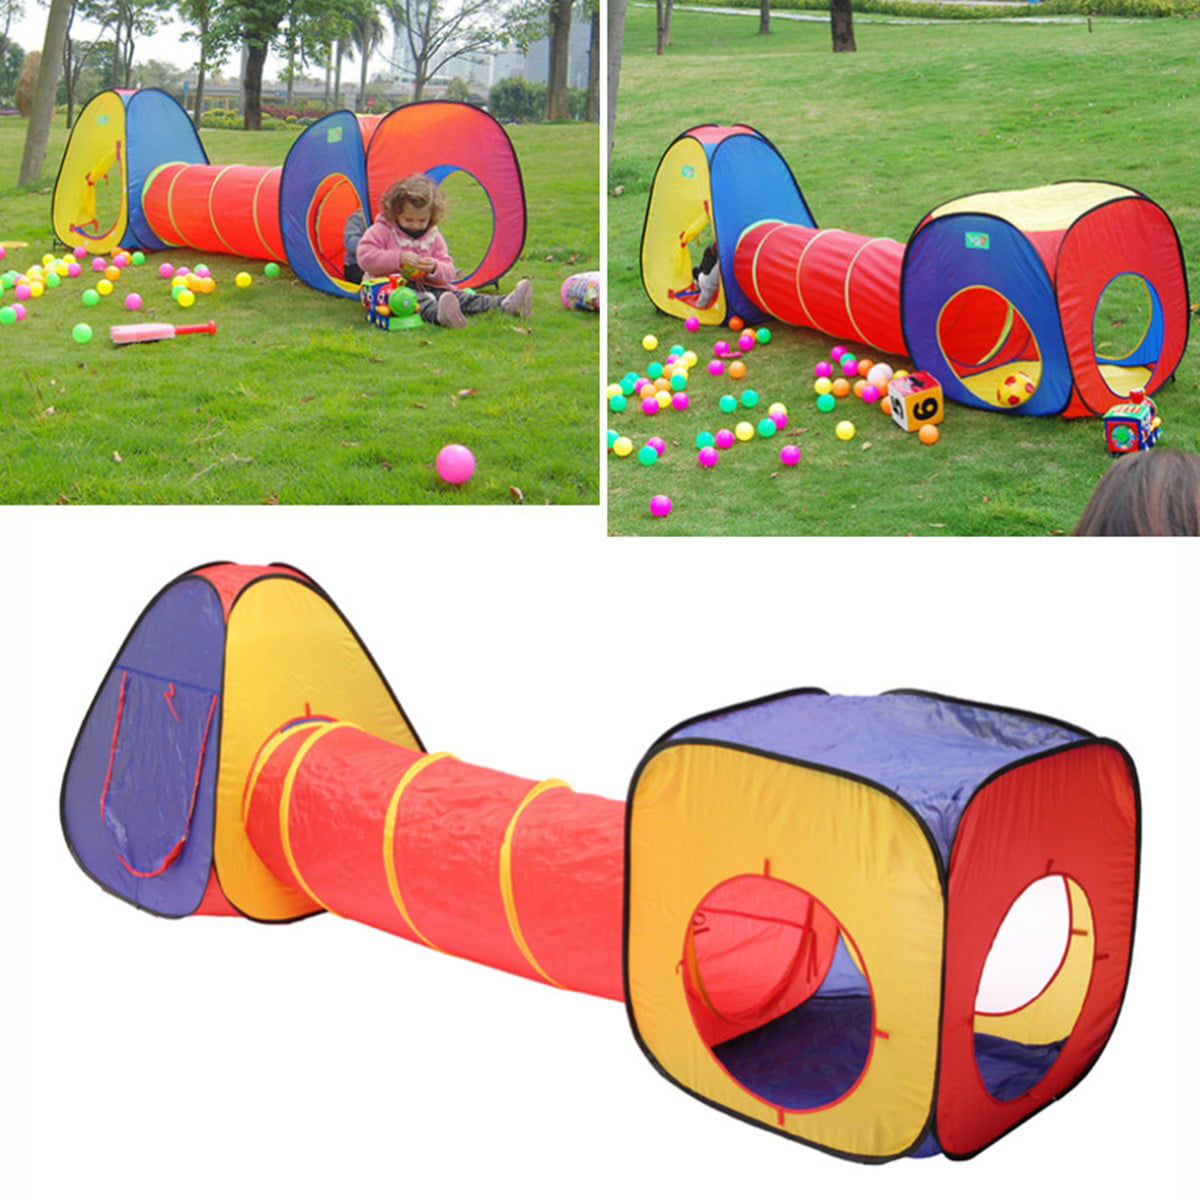 Pop Up Play Tent Tunnel 3 in 1 Ball Pit Tent for Children Indoor/Outdoor/Garden Playhouse Girls Boys Peradix Baby Kids Play Tunnel Tent